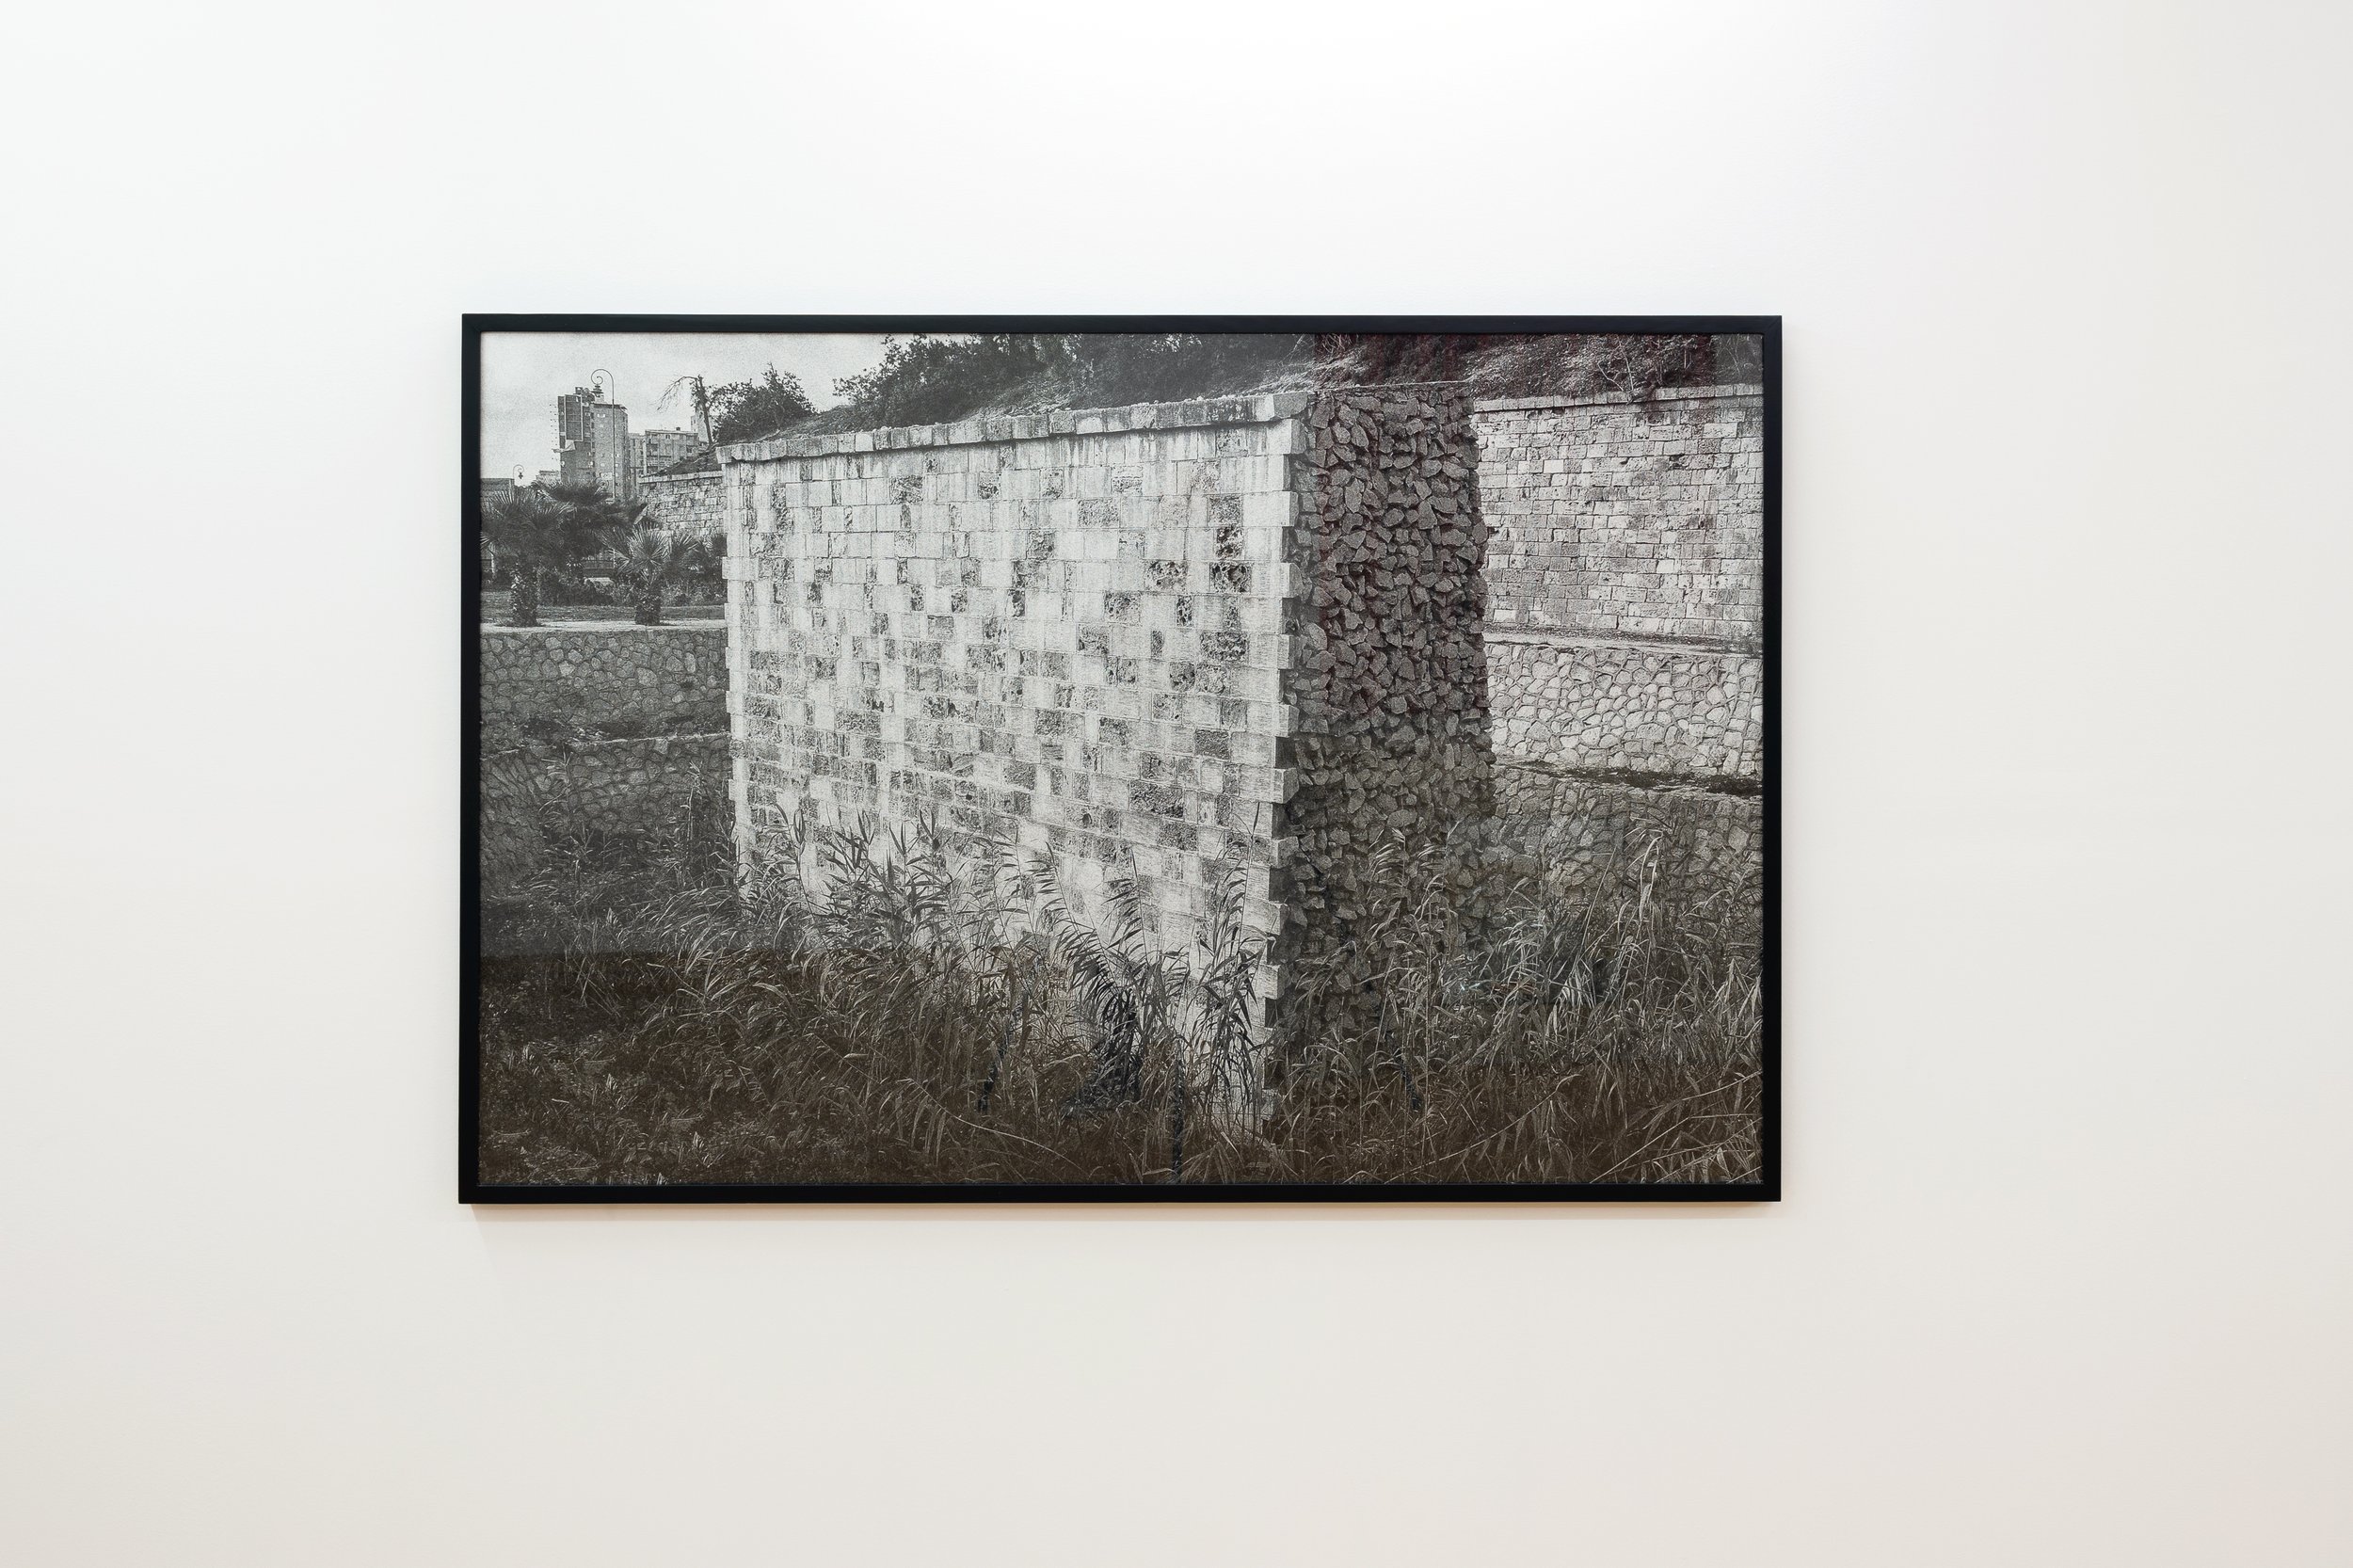  The Wall, inkjet print on archival photo paper, 114 x 169 cm.   Installation shot from The Beautiful Captive, Gypsum, 2023.  